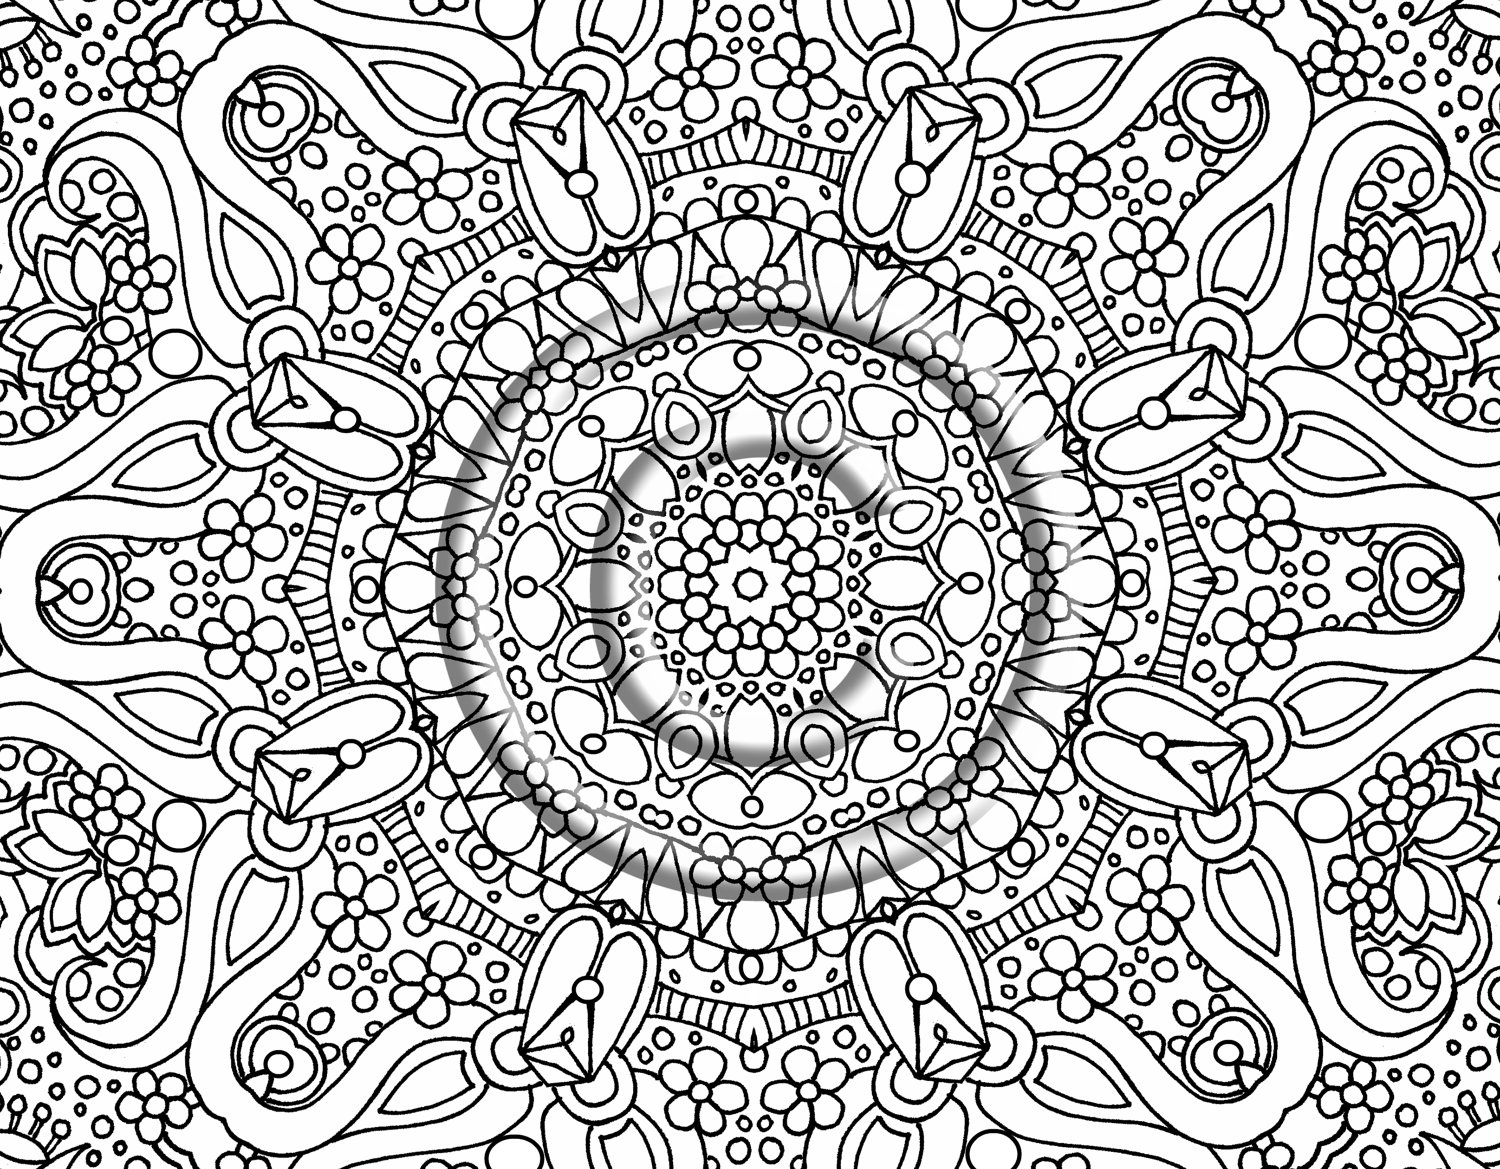 free-abstract-coloring-page-for-adults-easy-peasy-and-fun-abstract